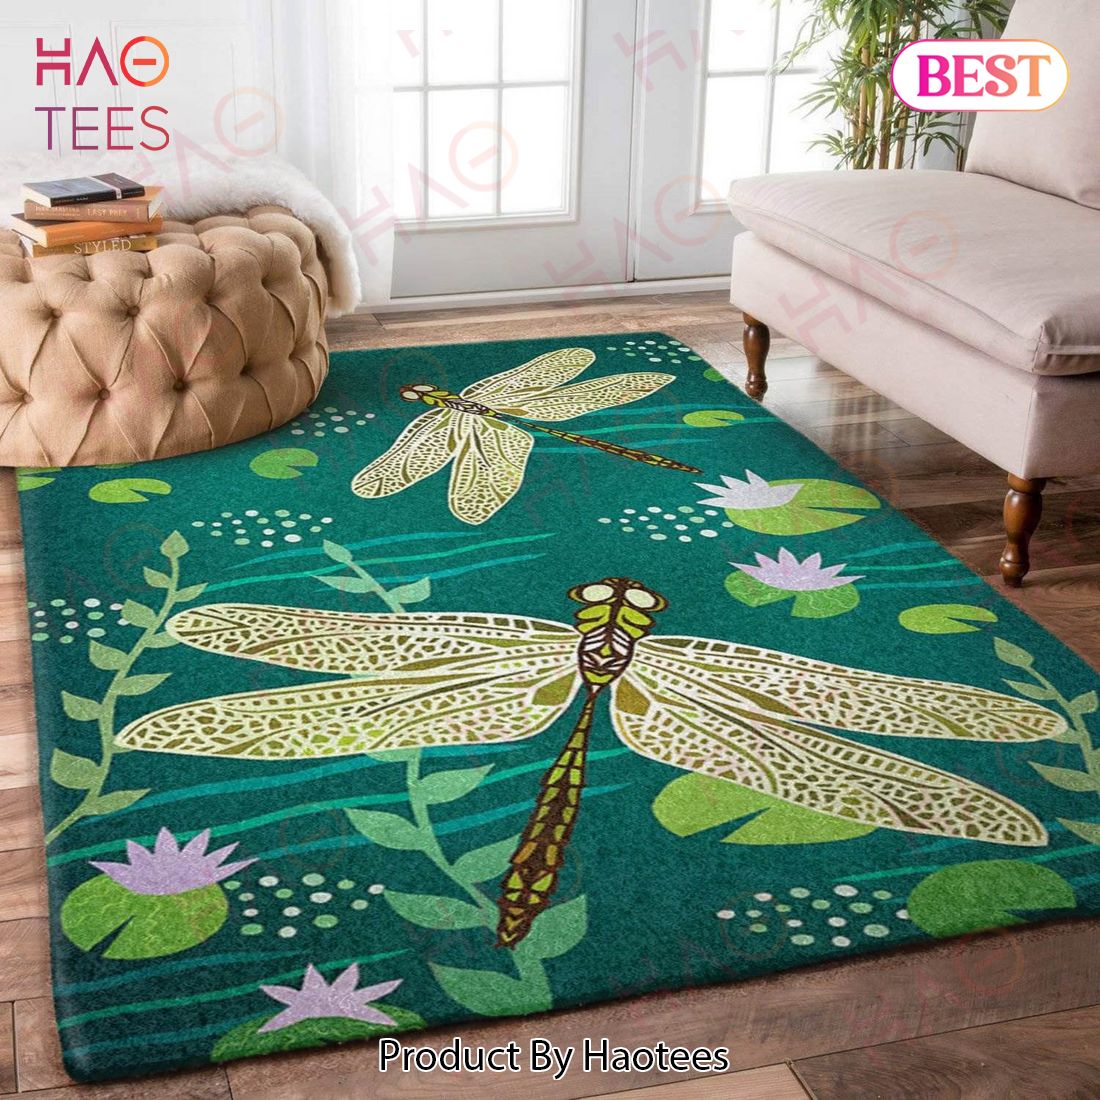 Dragonfly Limited Edition Area Rugs Carpet Mat Kitchen Rugs Floor Decor – CA91